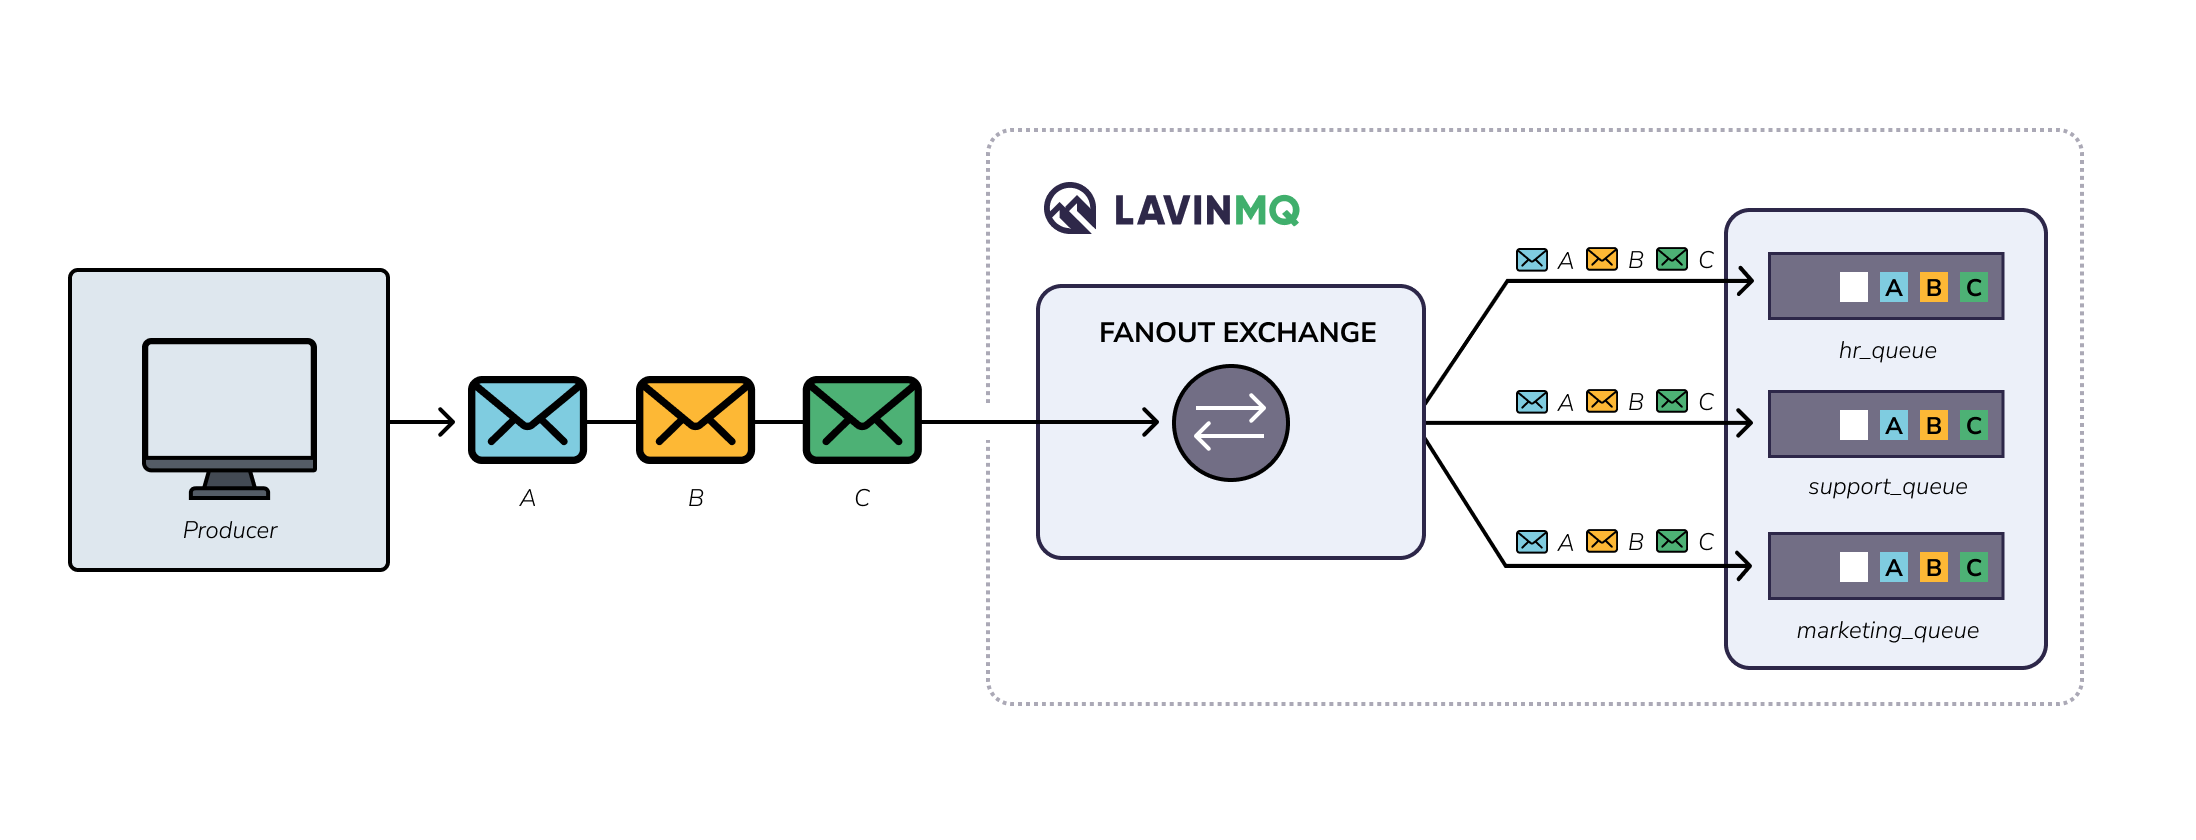 Message flow in fanout exchanges